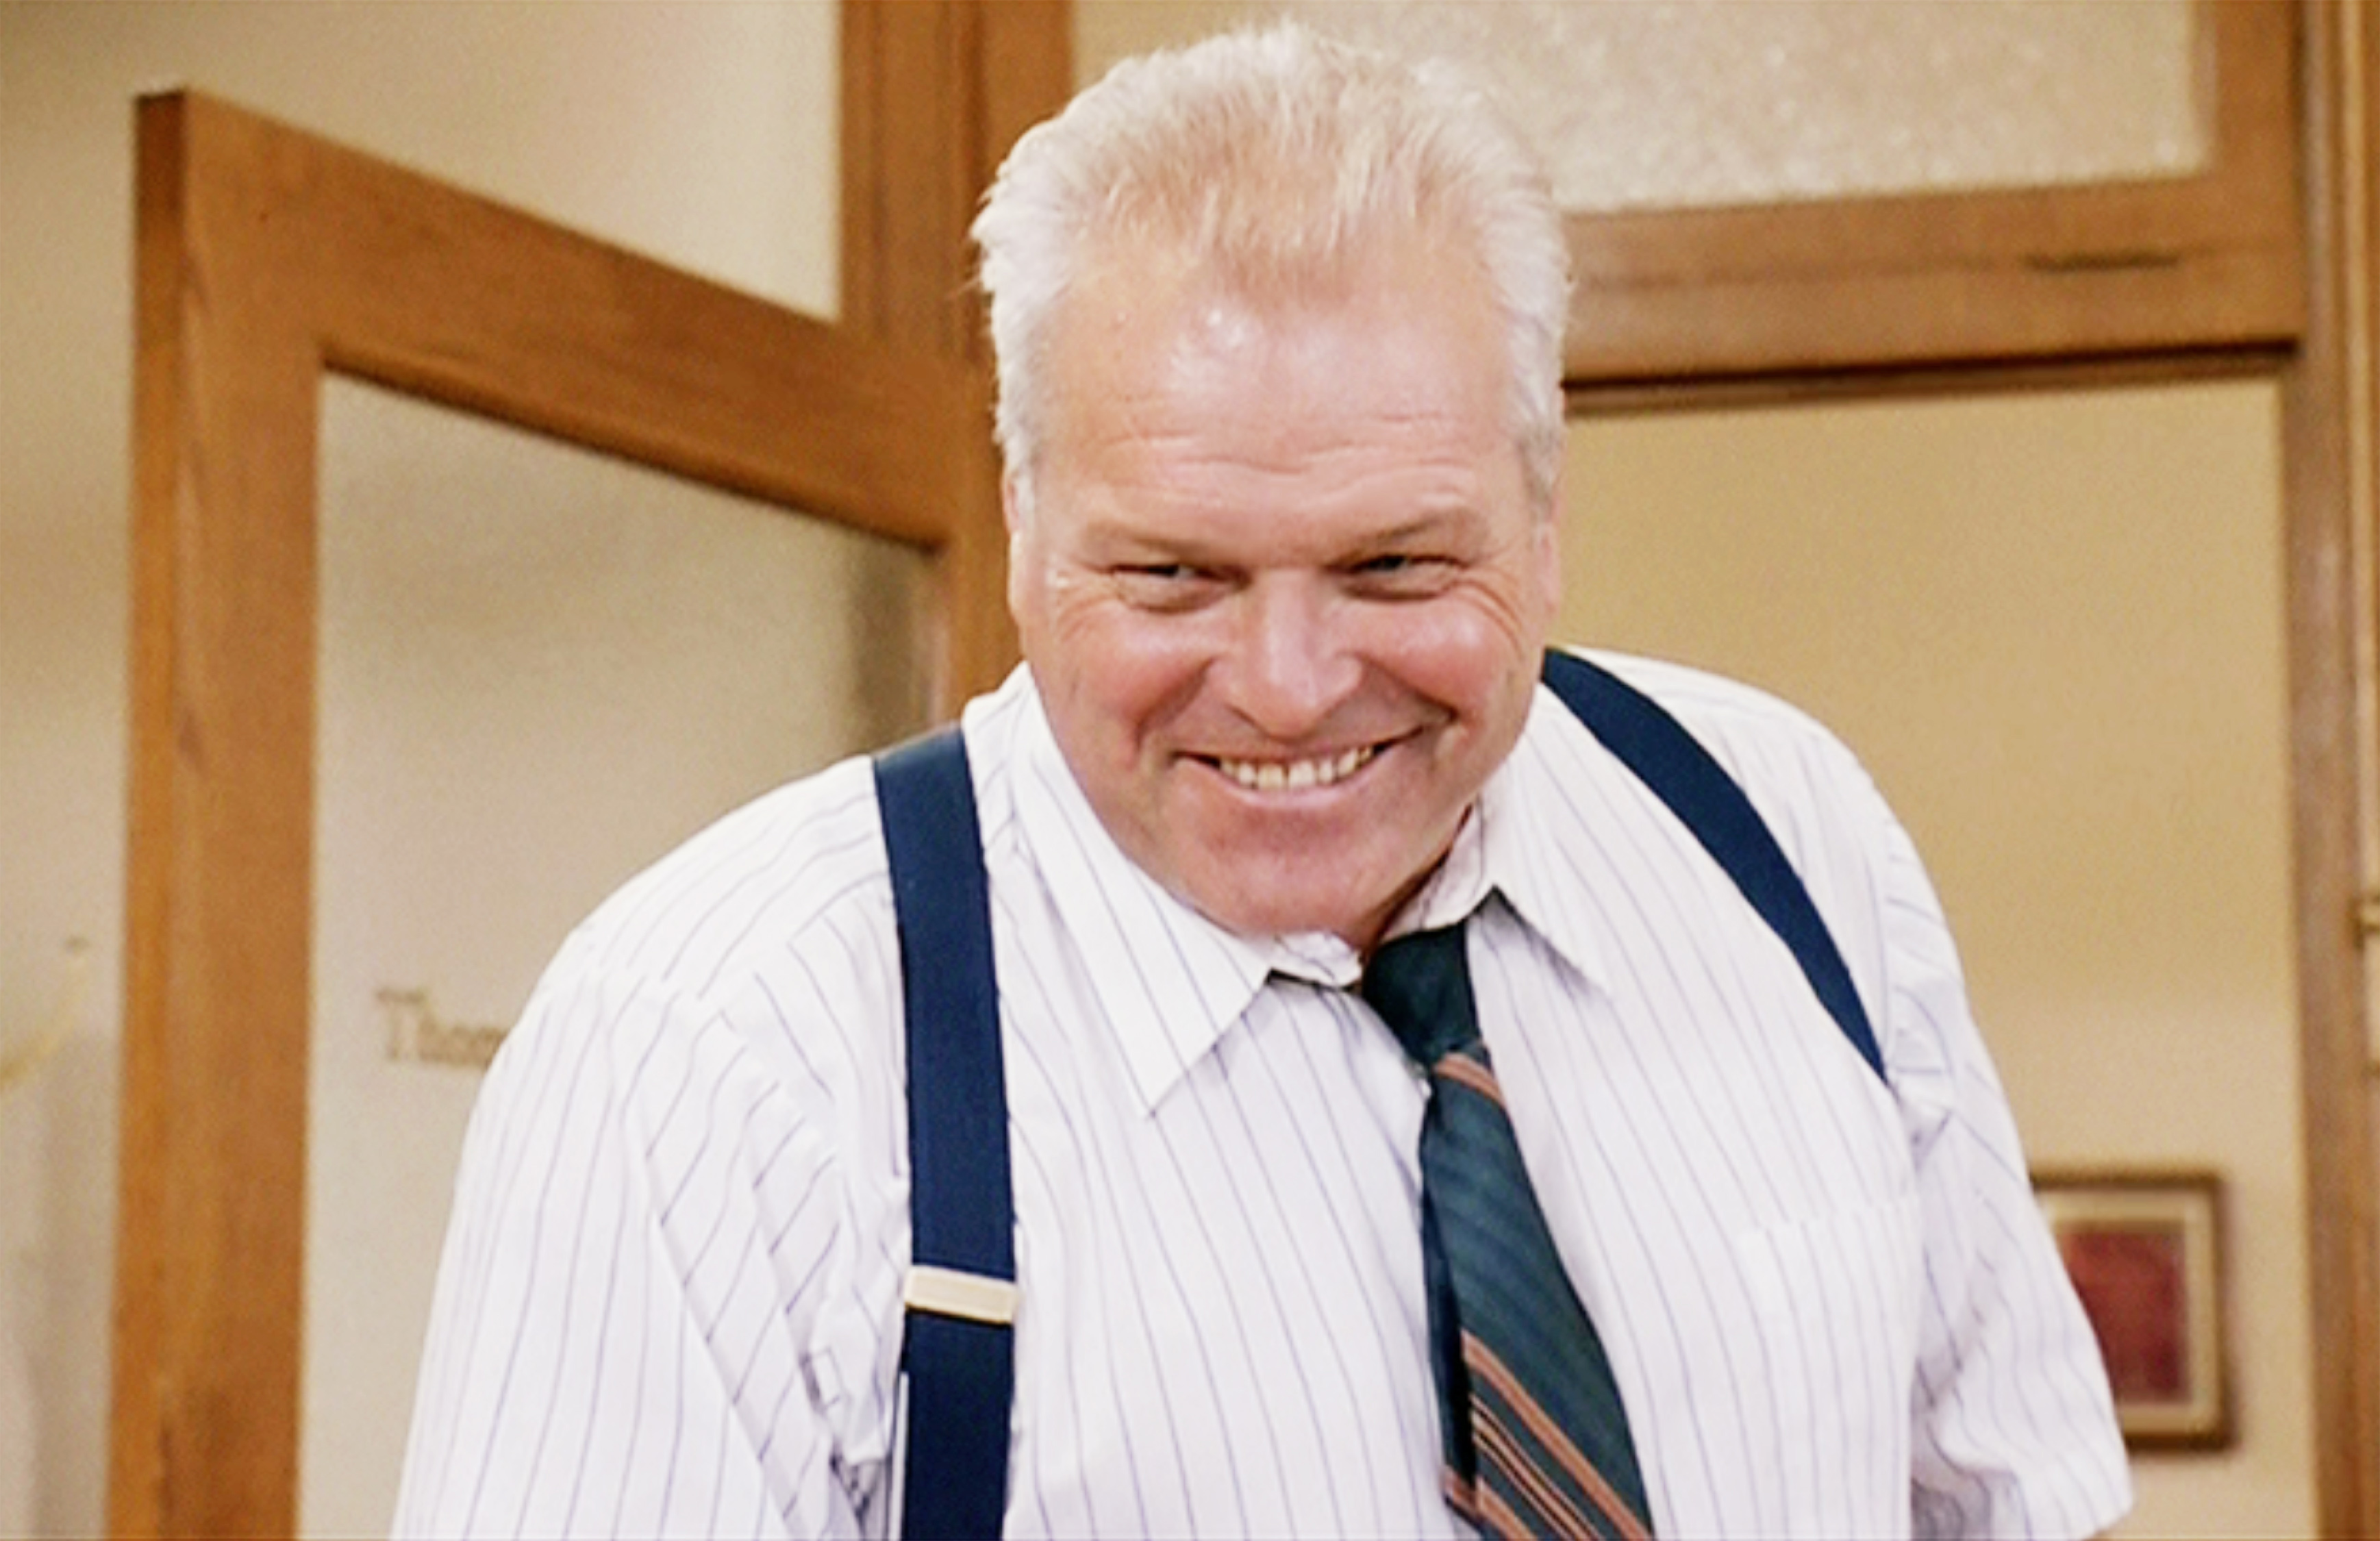 LOS ANGELES - MARCH 31: The movie "Tommy Boy", directed by Peter Segal. Seen here, Brian Dennehy as Big Tom Callahan.  Initial theatrical release March 31, 1995. Screen capture. Paramount Pictures. (Photo by CBS via Getty Images)